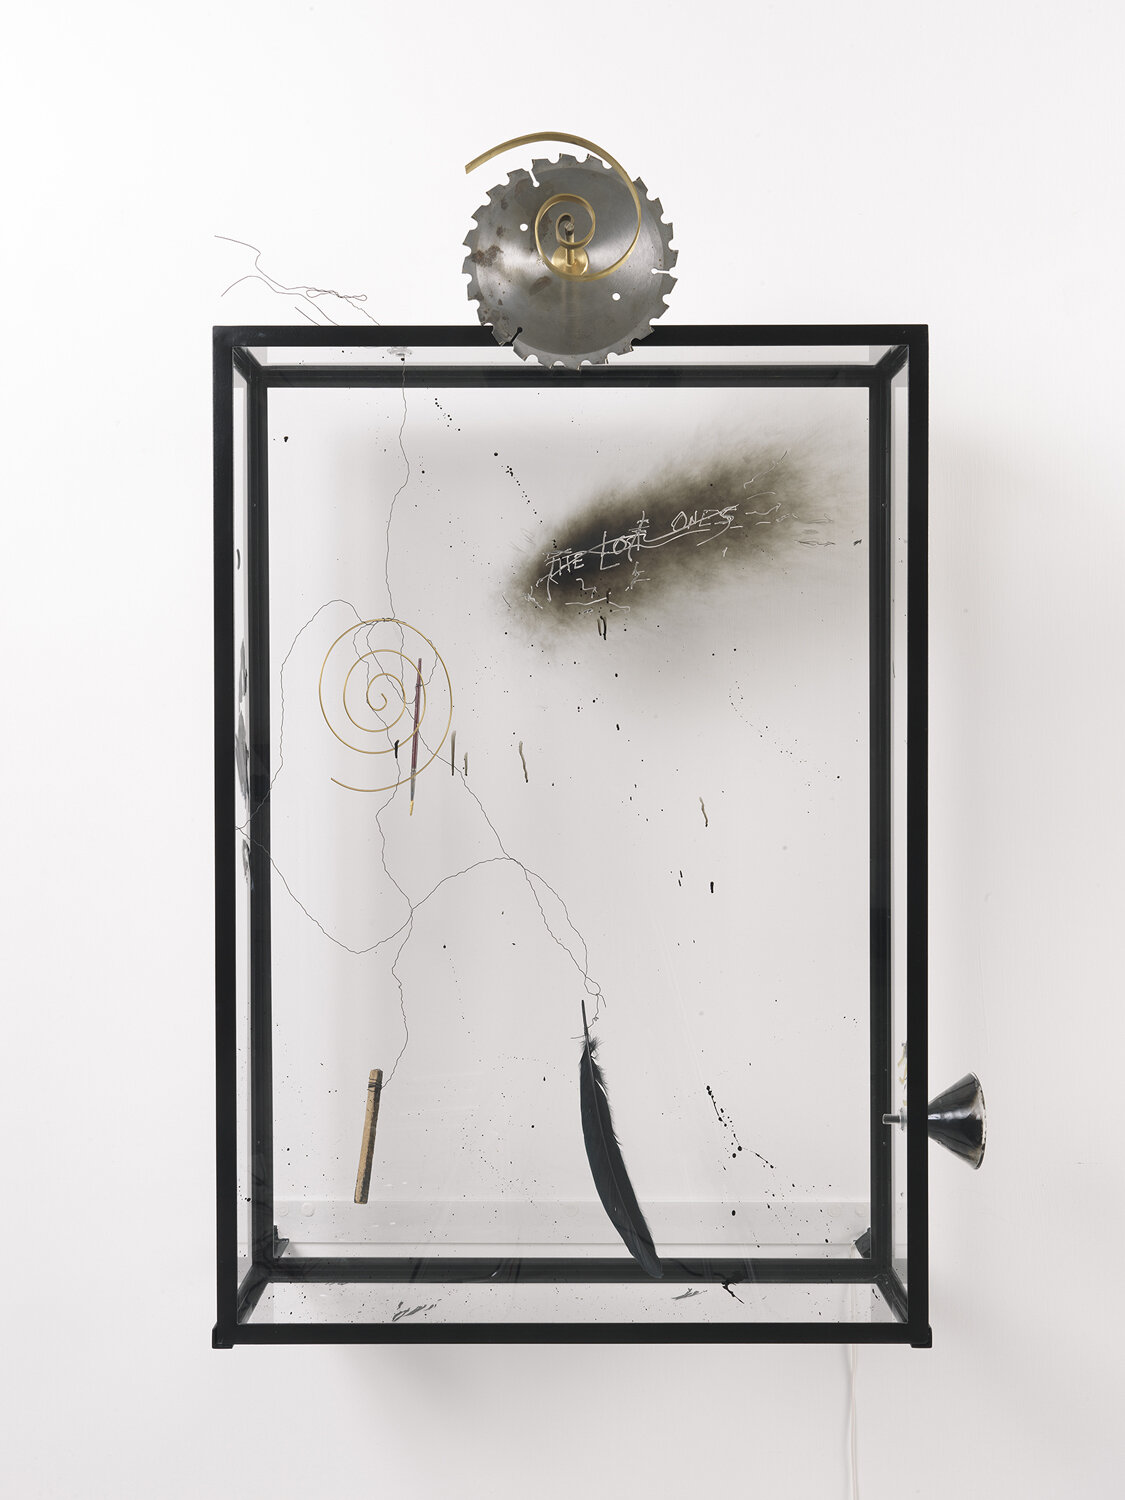 The Lost Ones, Samuel Beckett, 2015, glass surface treated with flaming, steel, glass funnel, brush, saw blade, feather, wood, electronic device, brass, wire, 116 x 77 x 31 cm